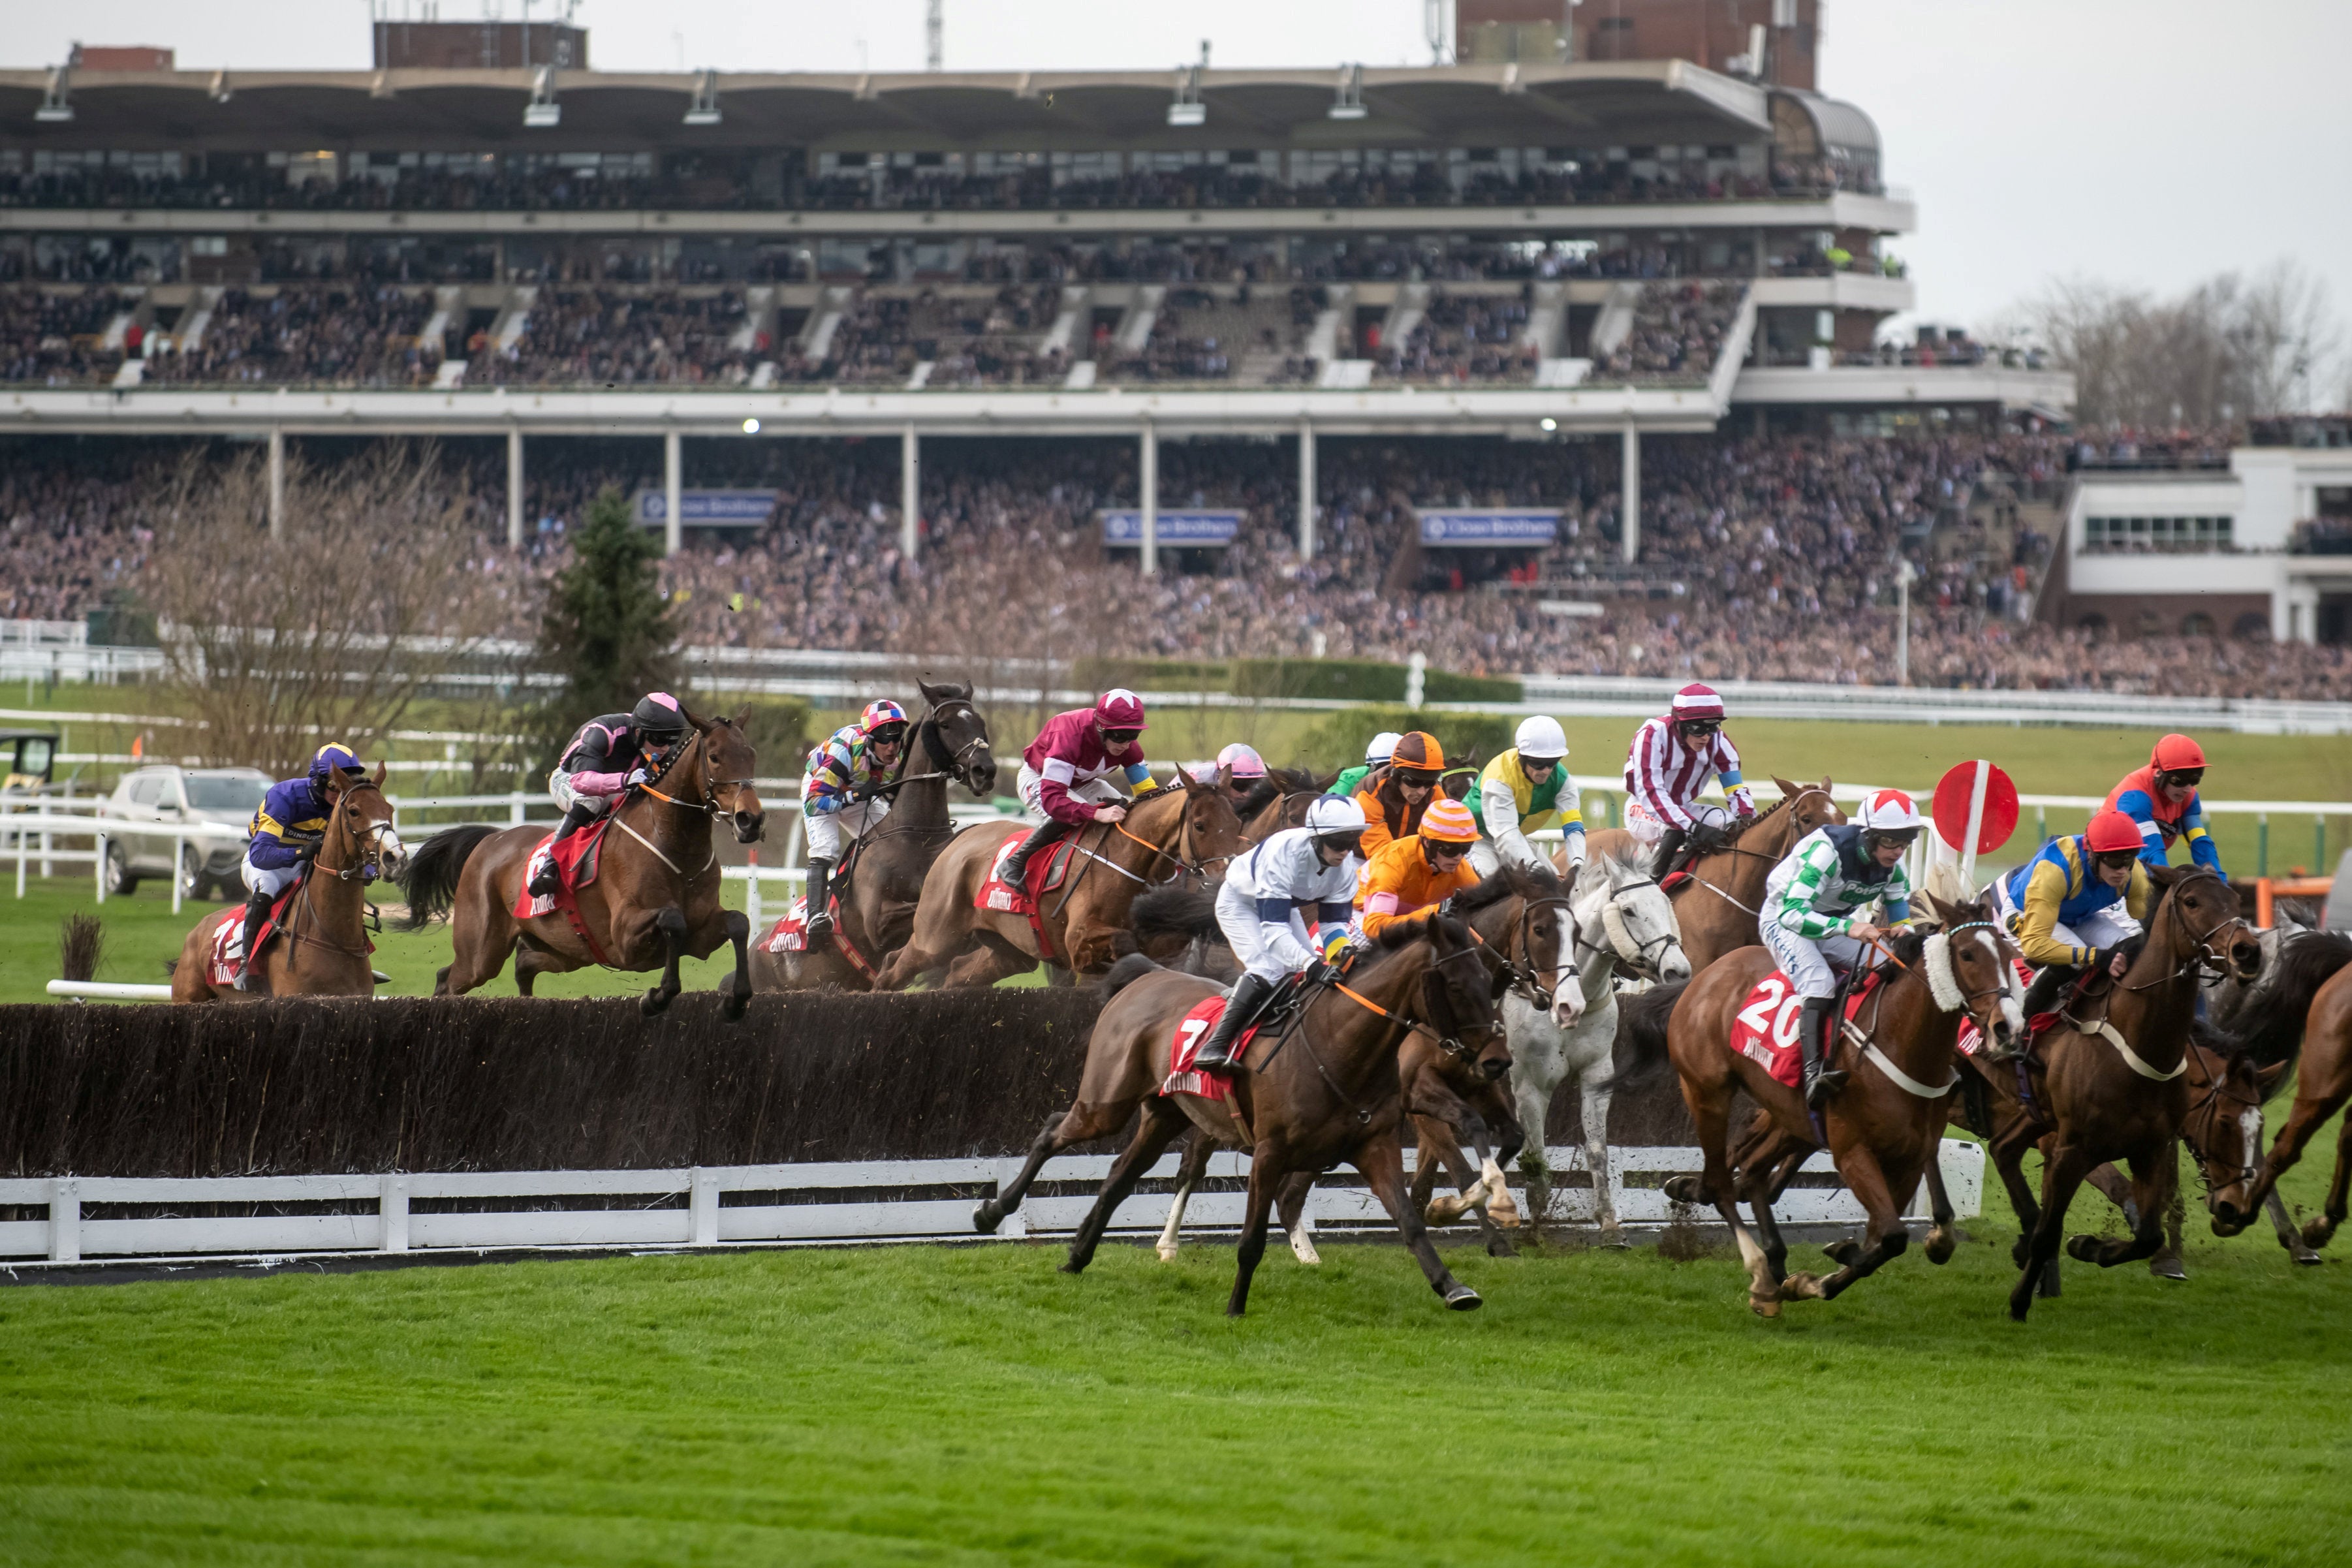 Cheltenham is particularly deadly for horses